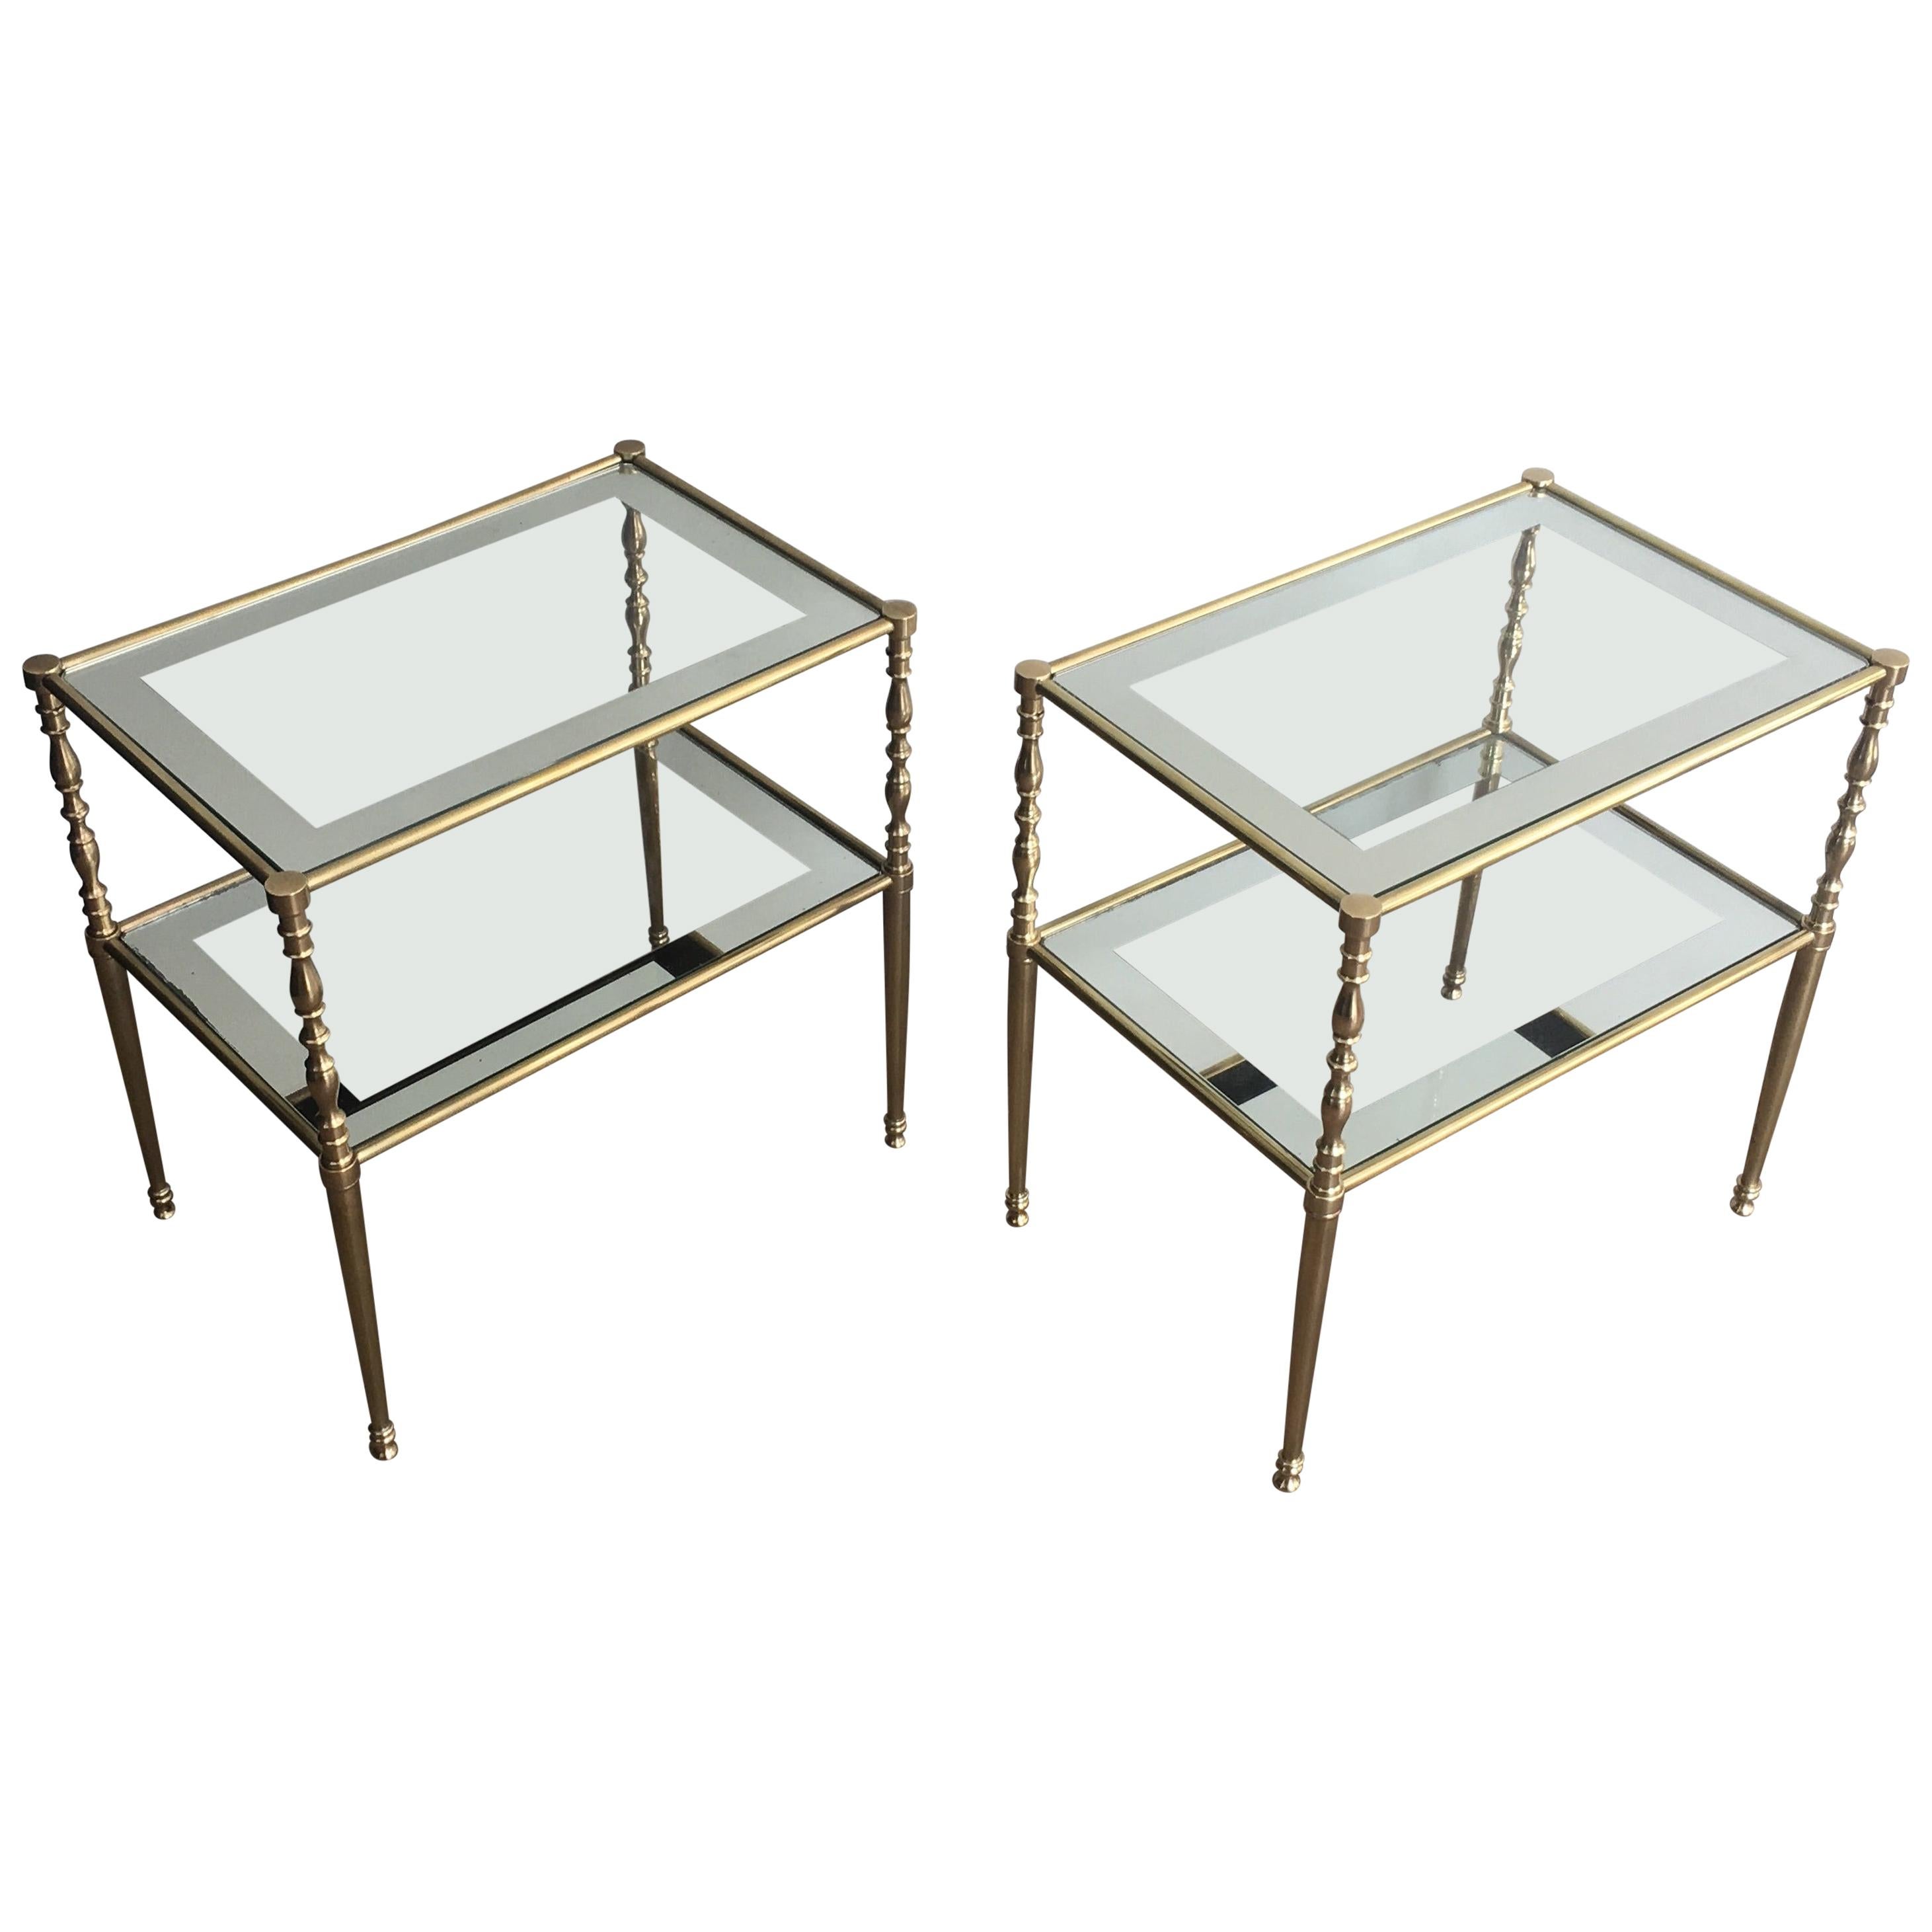 Pair of Brass Side Tables with Clear Glass Shelves Surrounded by Silvered Mirror